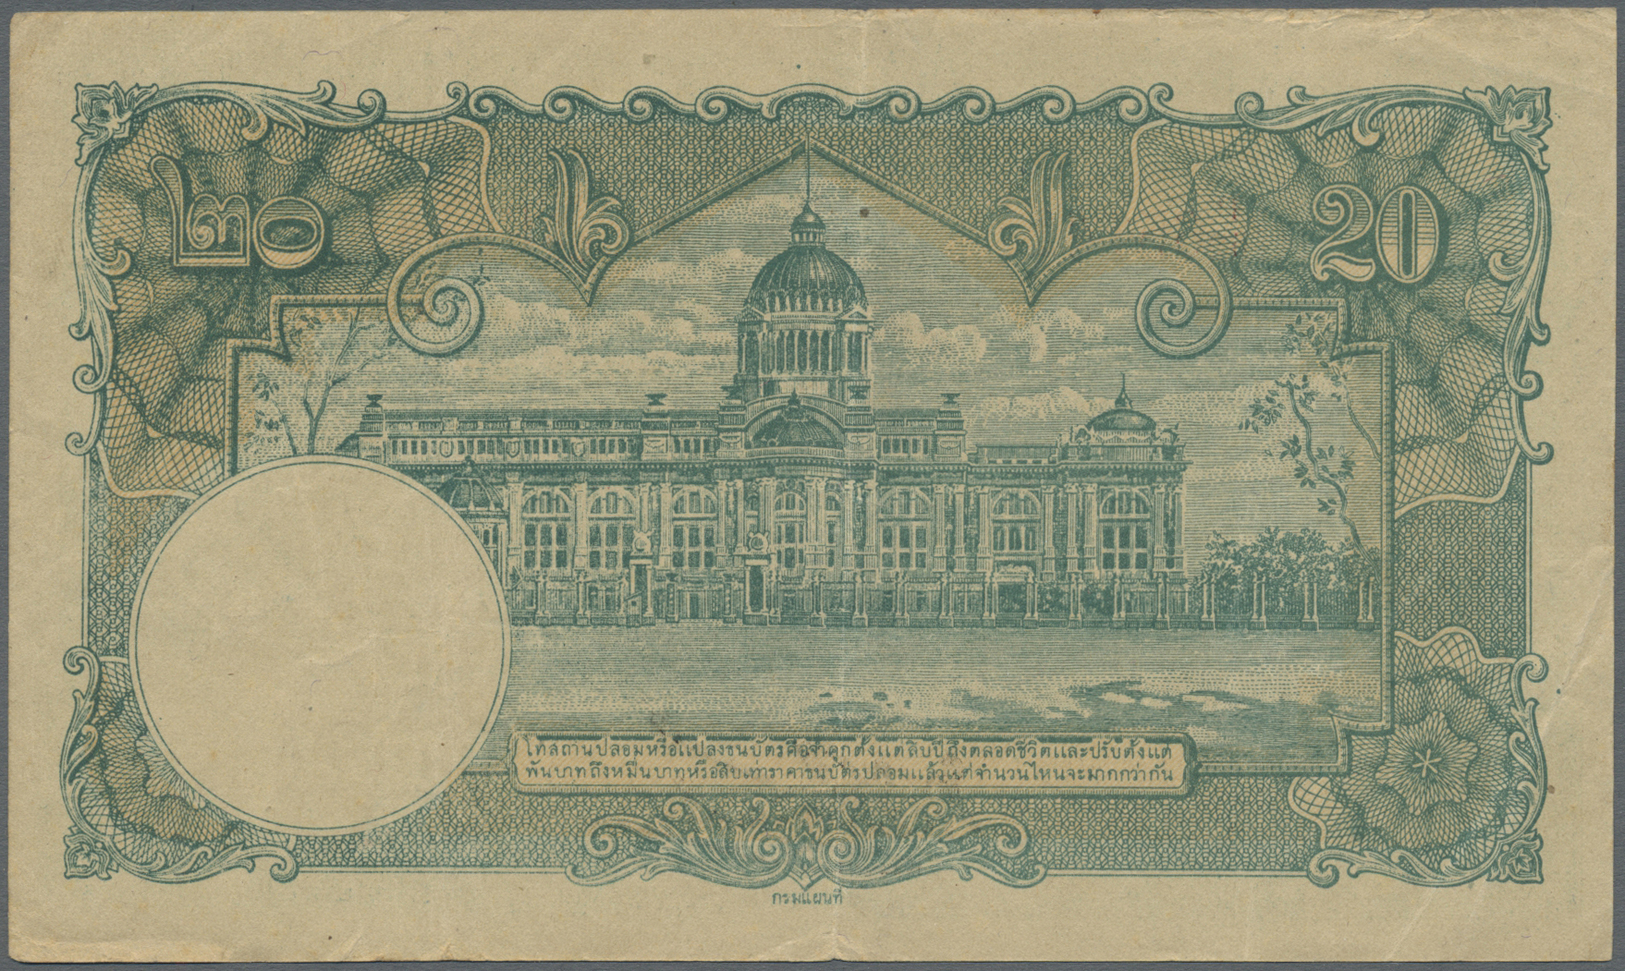 03097 Thailand: 20 Baht ND(1943) P. 41, Center Fold And Light Creases In Paper, No Holes Or Tears, Still Strongness In P - Tailandia